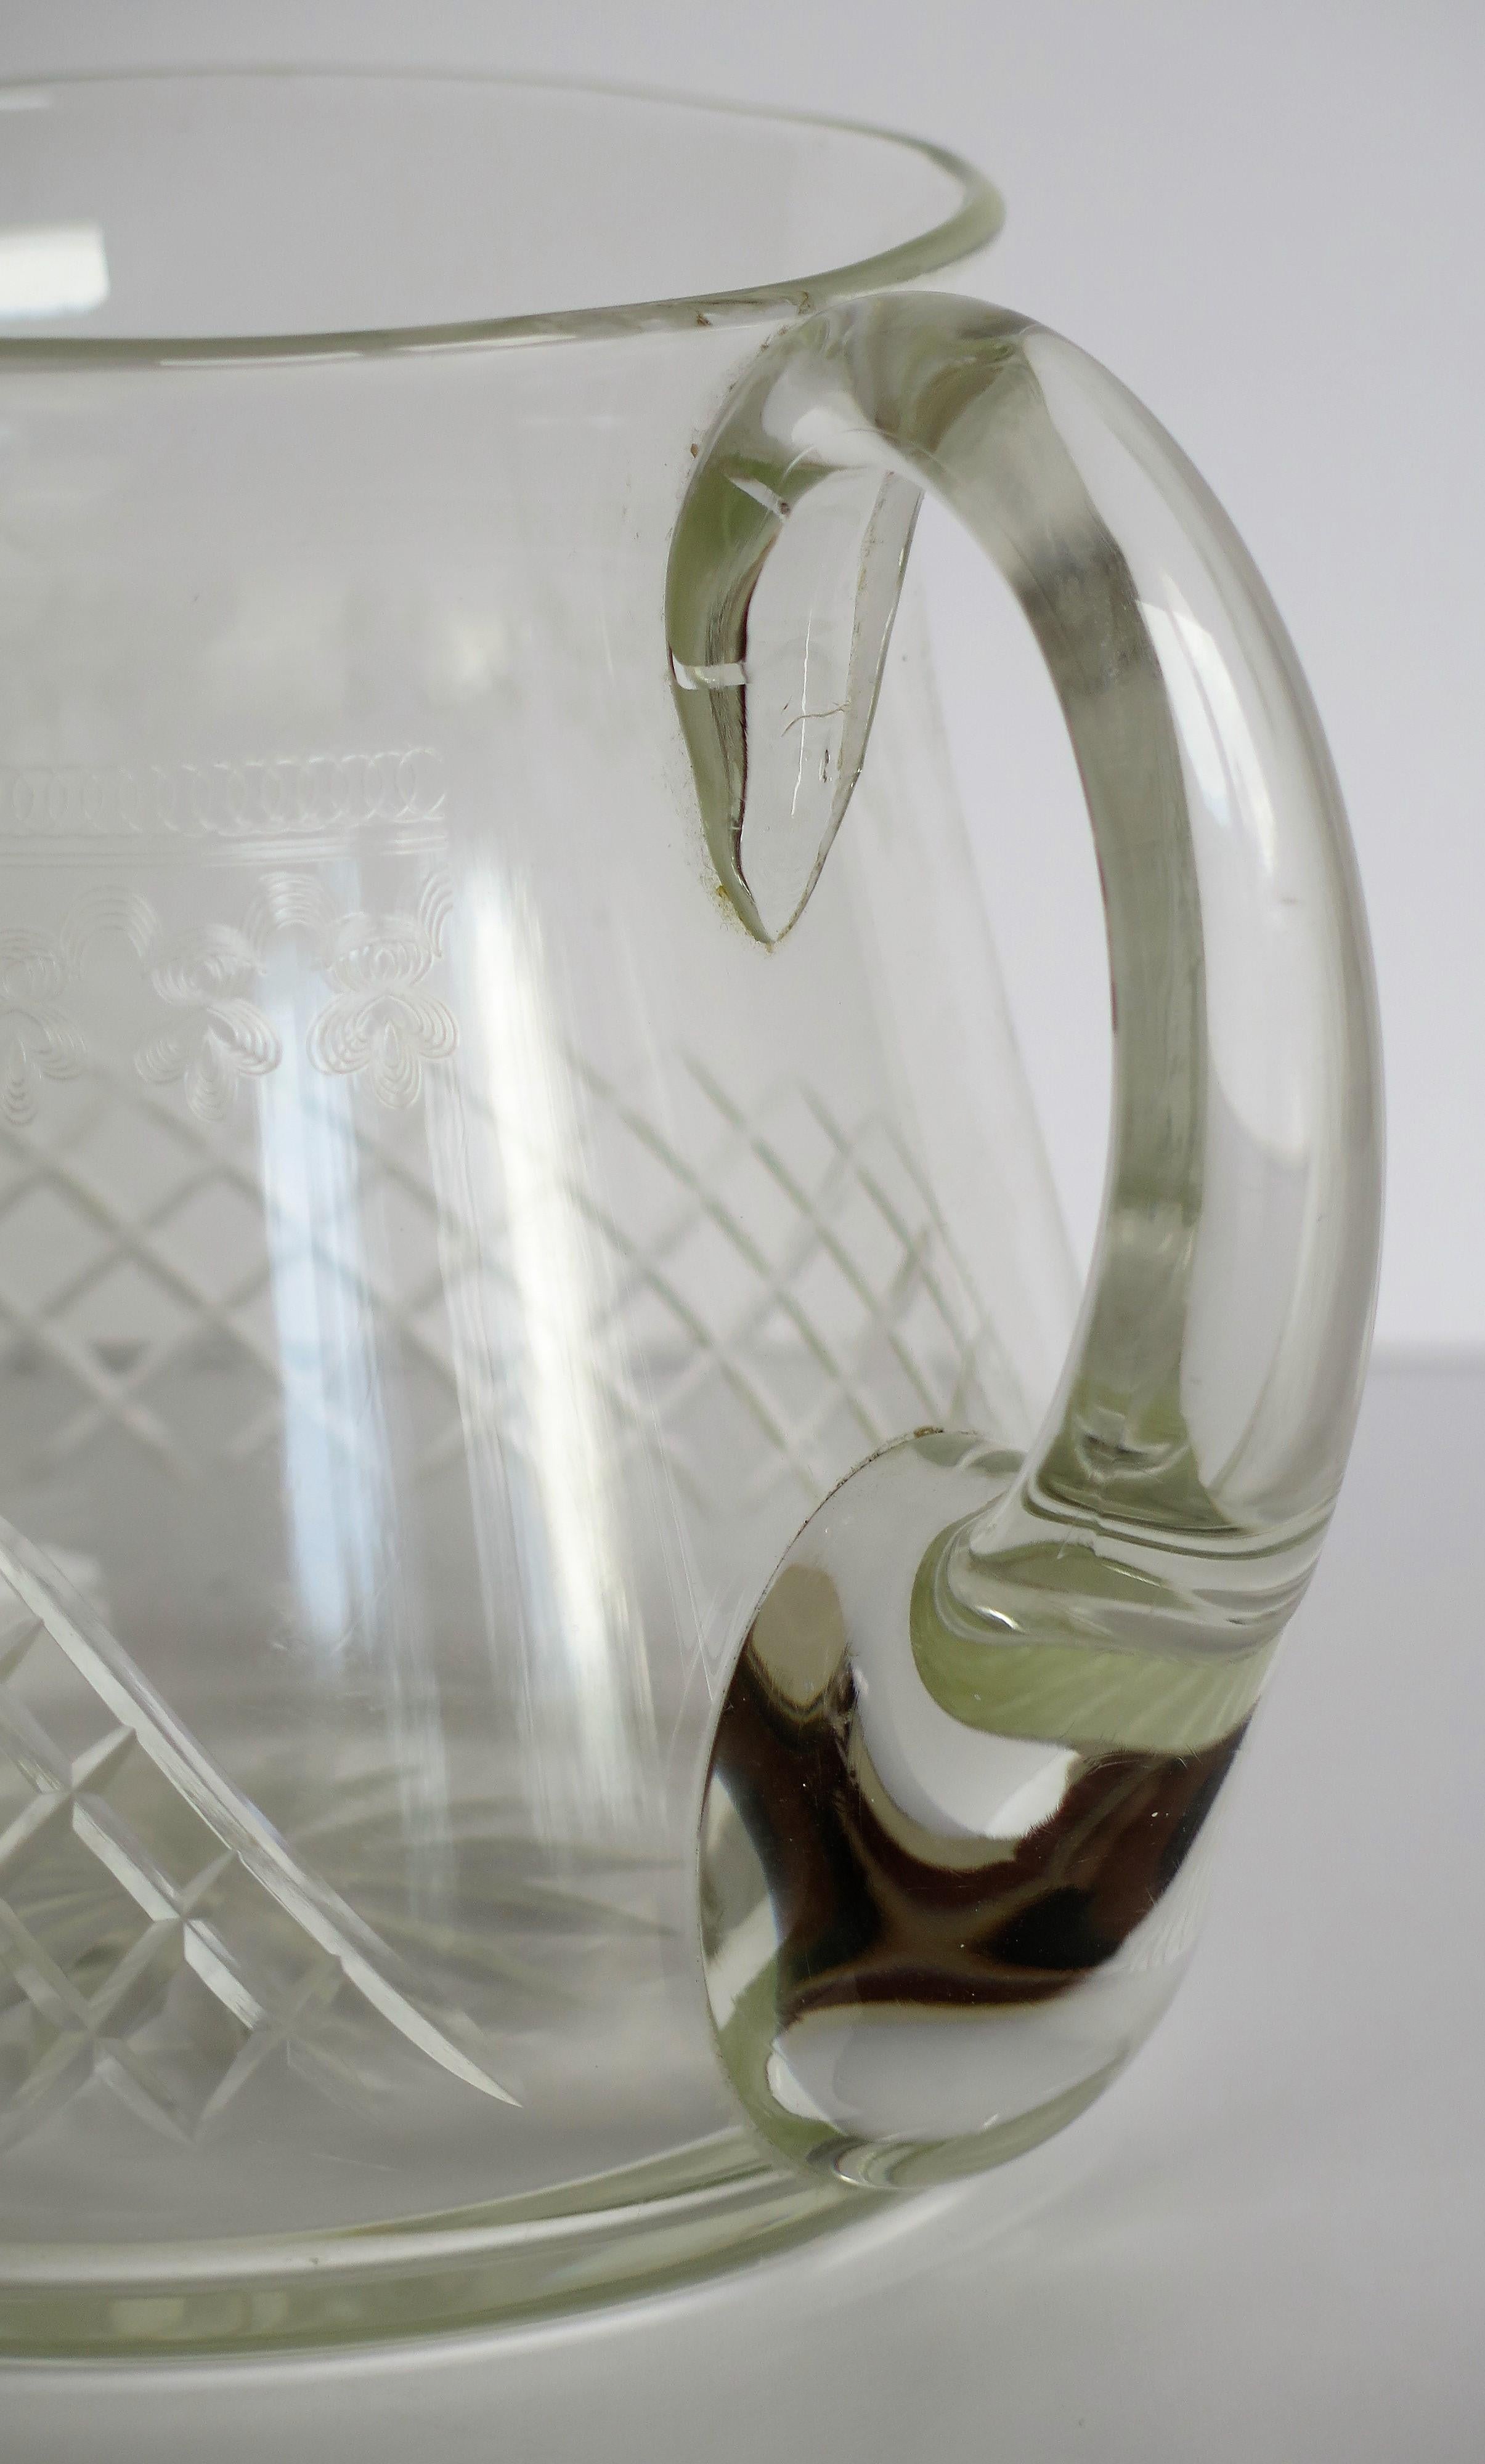 Edwardian Water Jug or Pitcher Crystal Lead Glass Cut and Engraved Holds 1.5 Pt 3